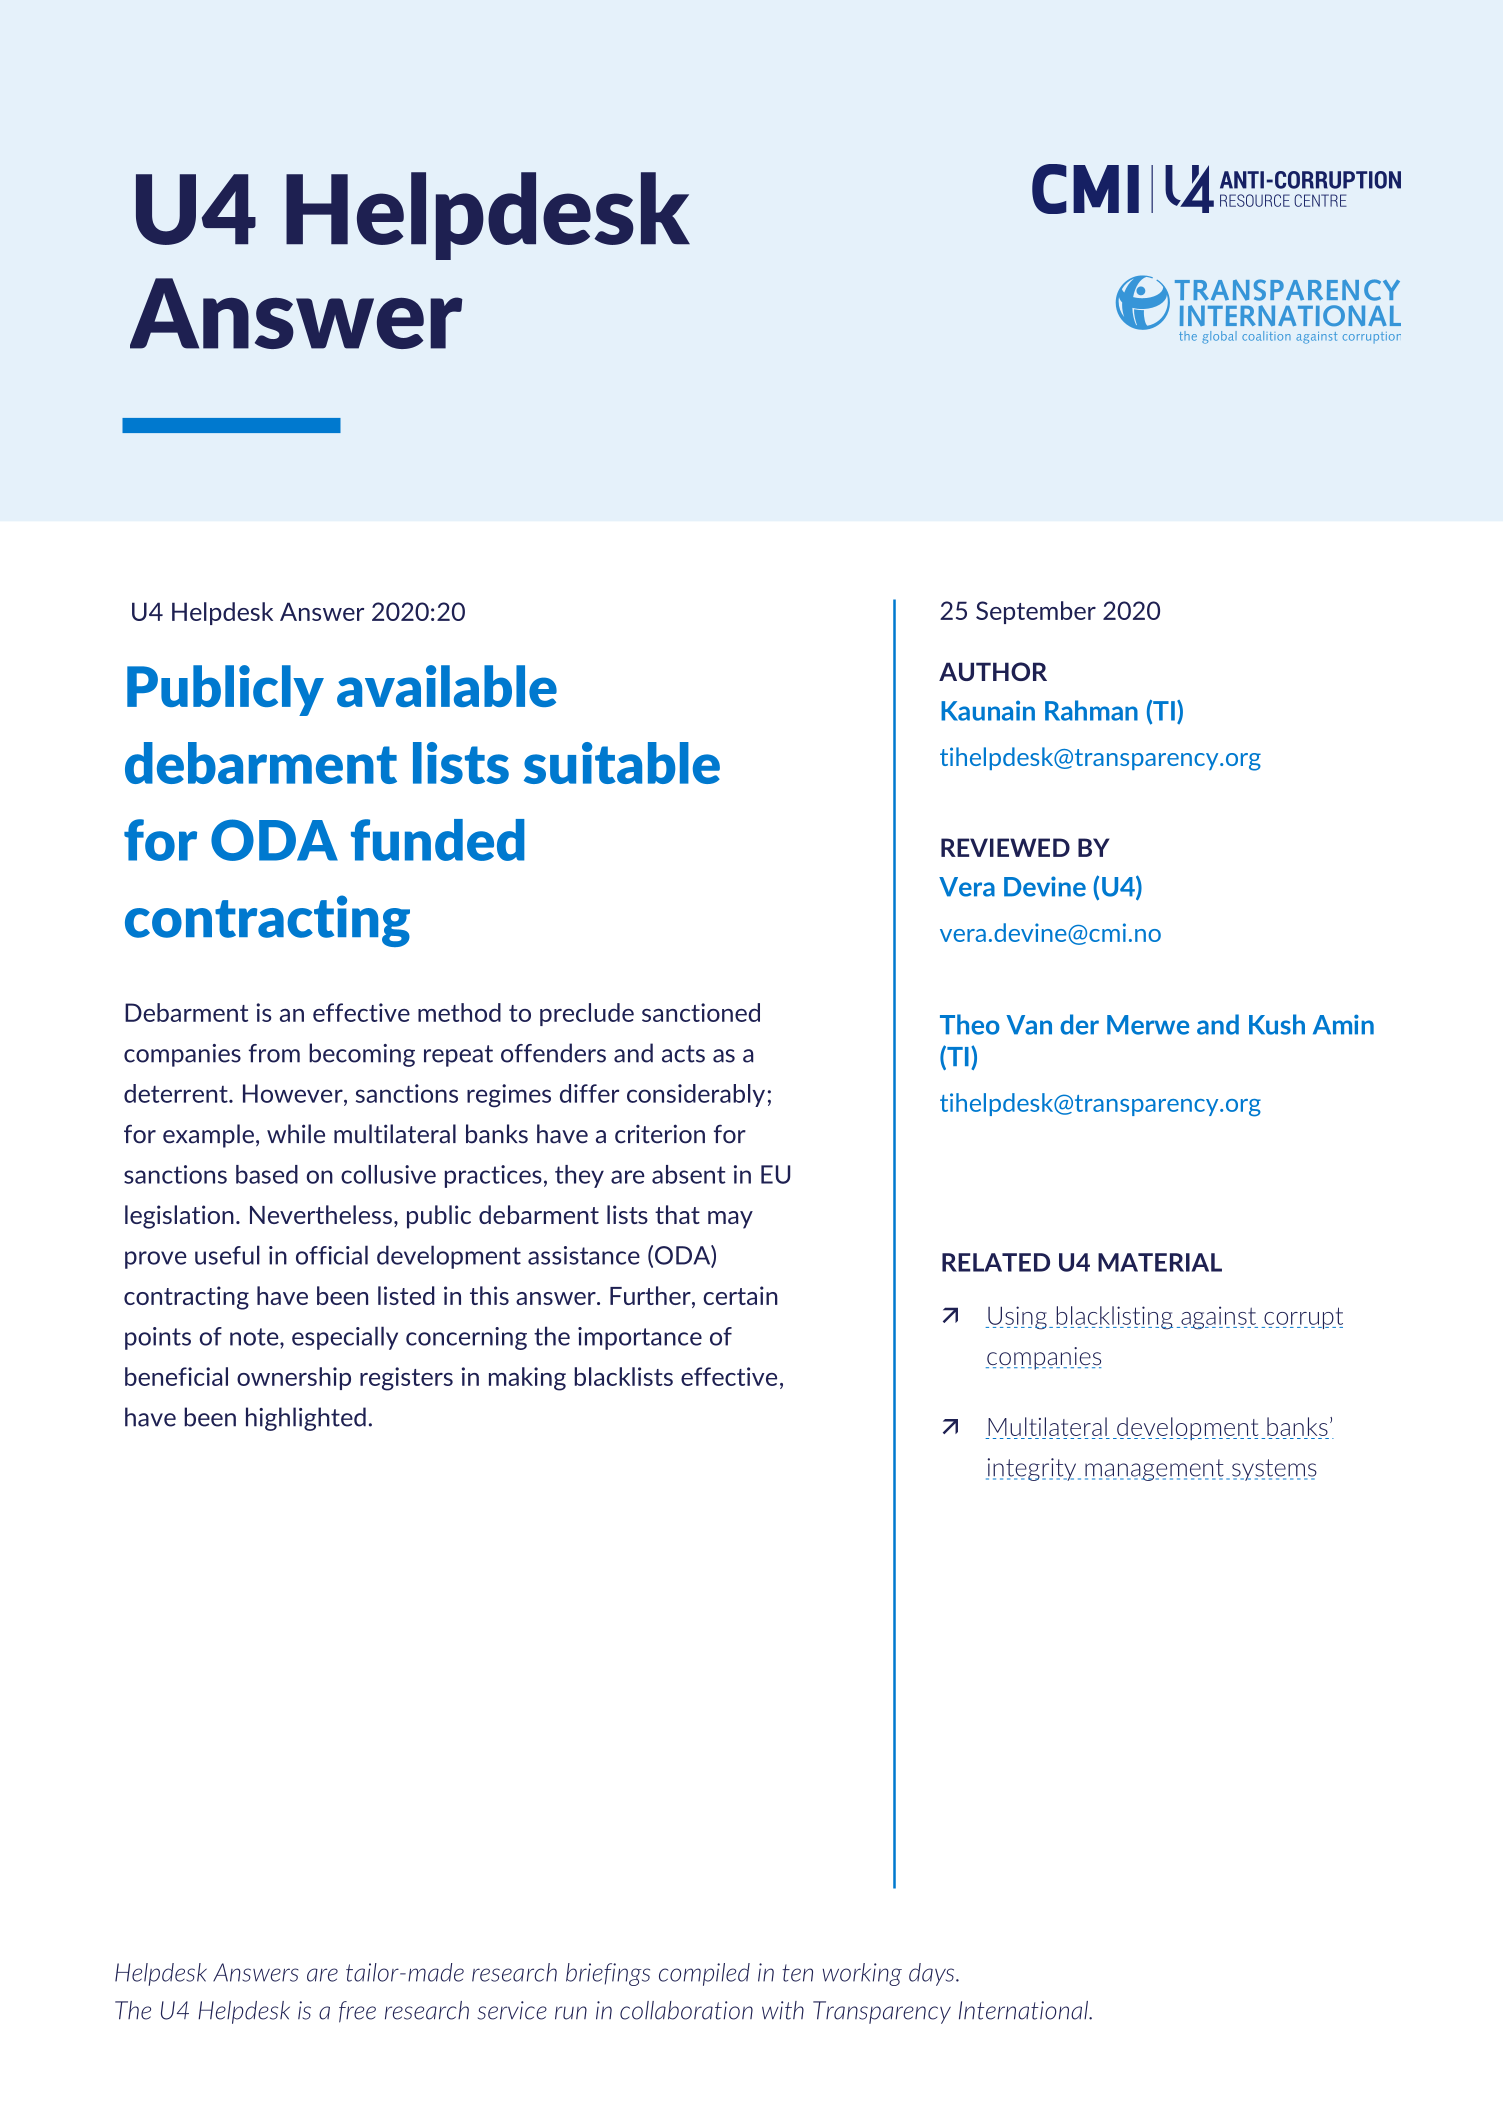 Publicly available debarment lists suitable for ODA funded contracting